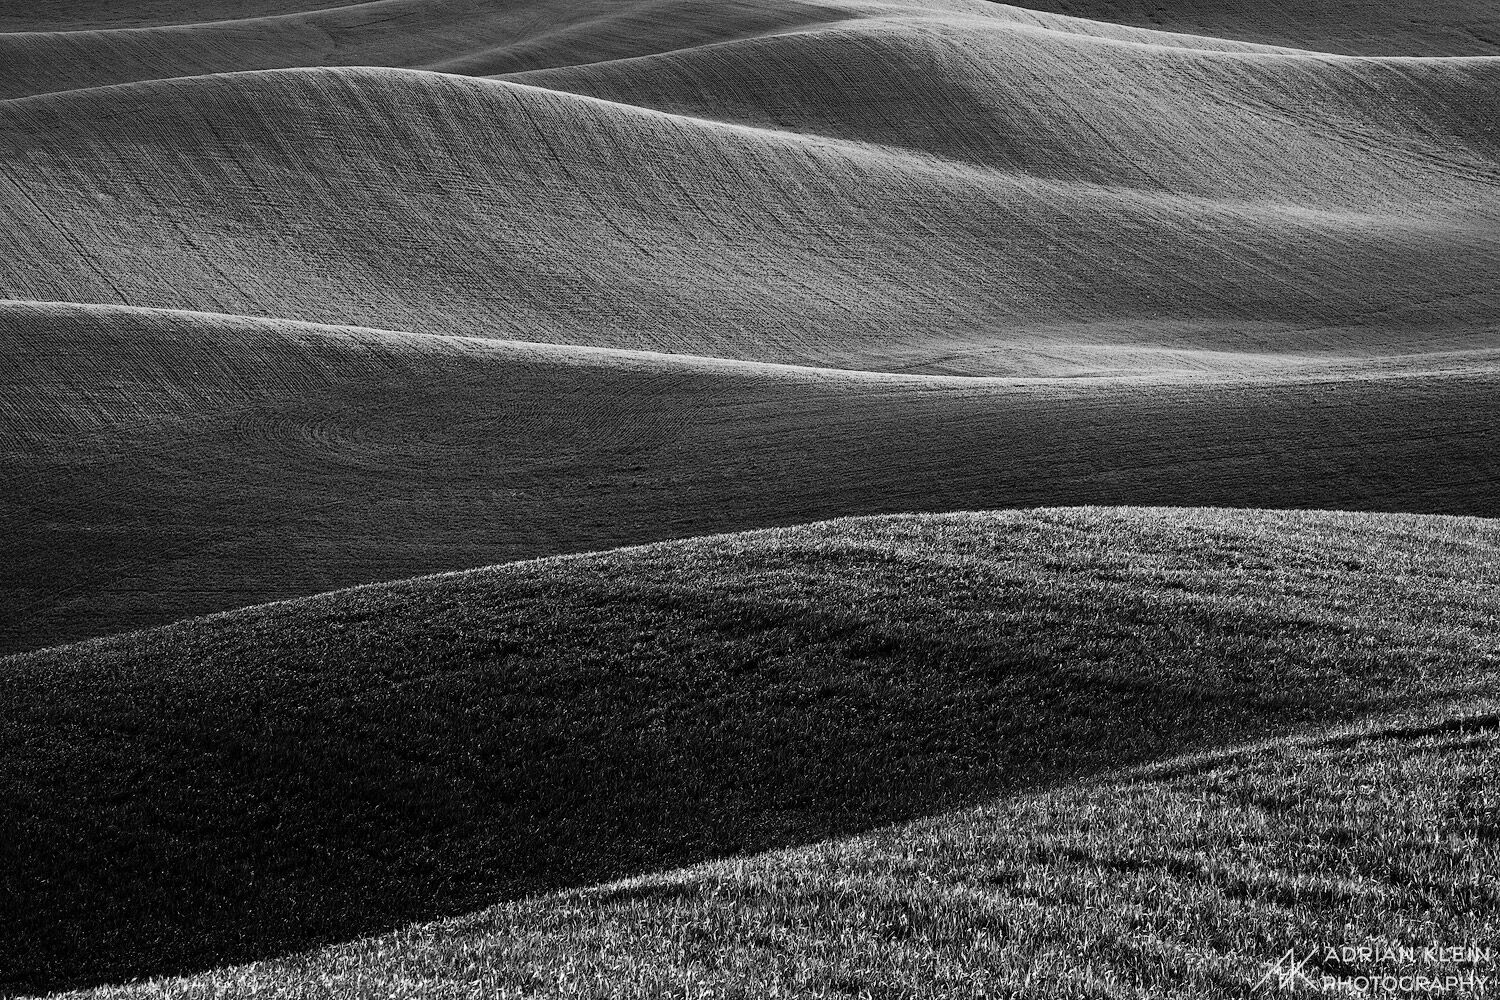 A close up more abstract look of Palouse Hills in Washington.